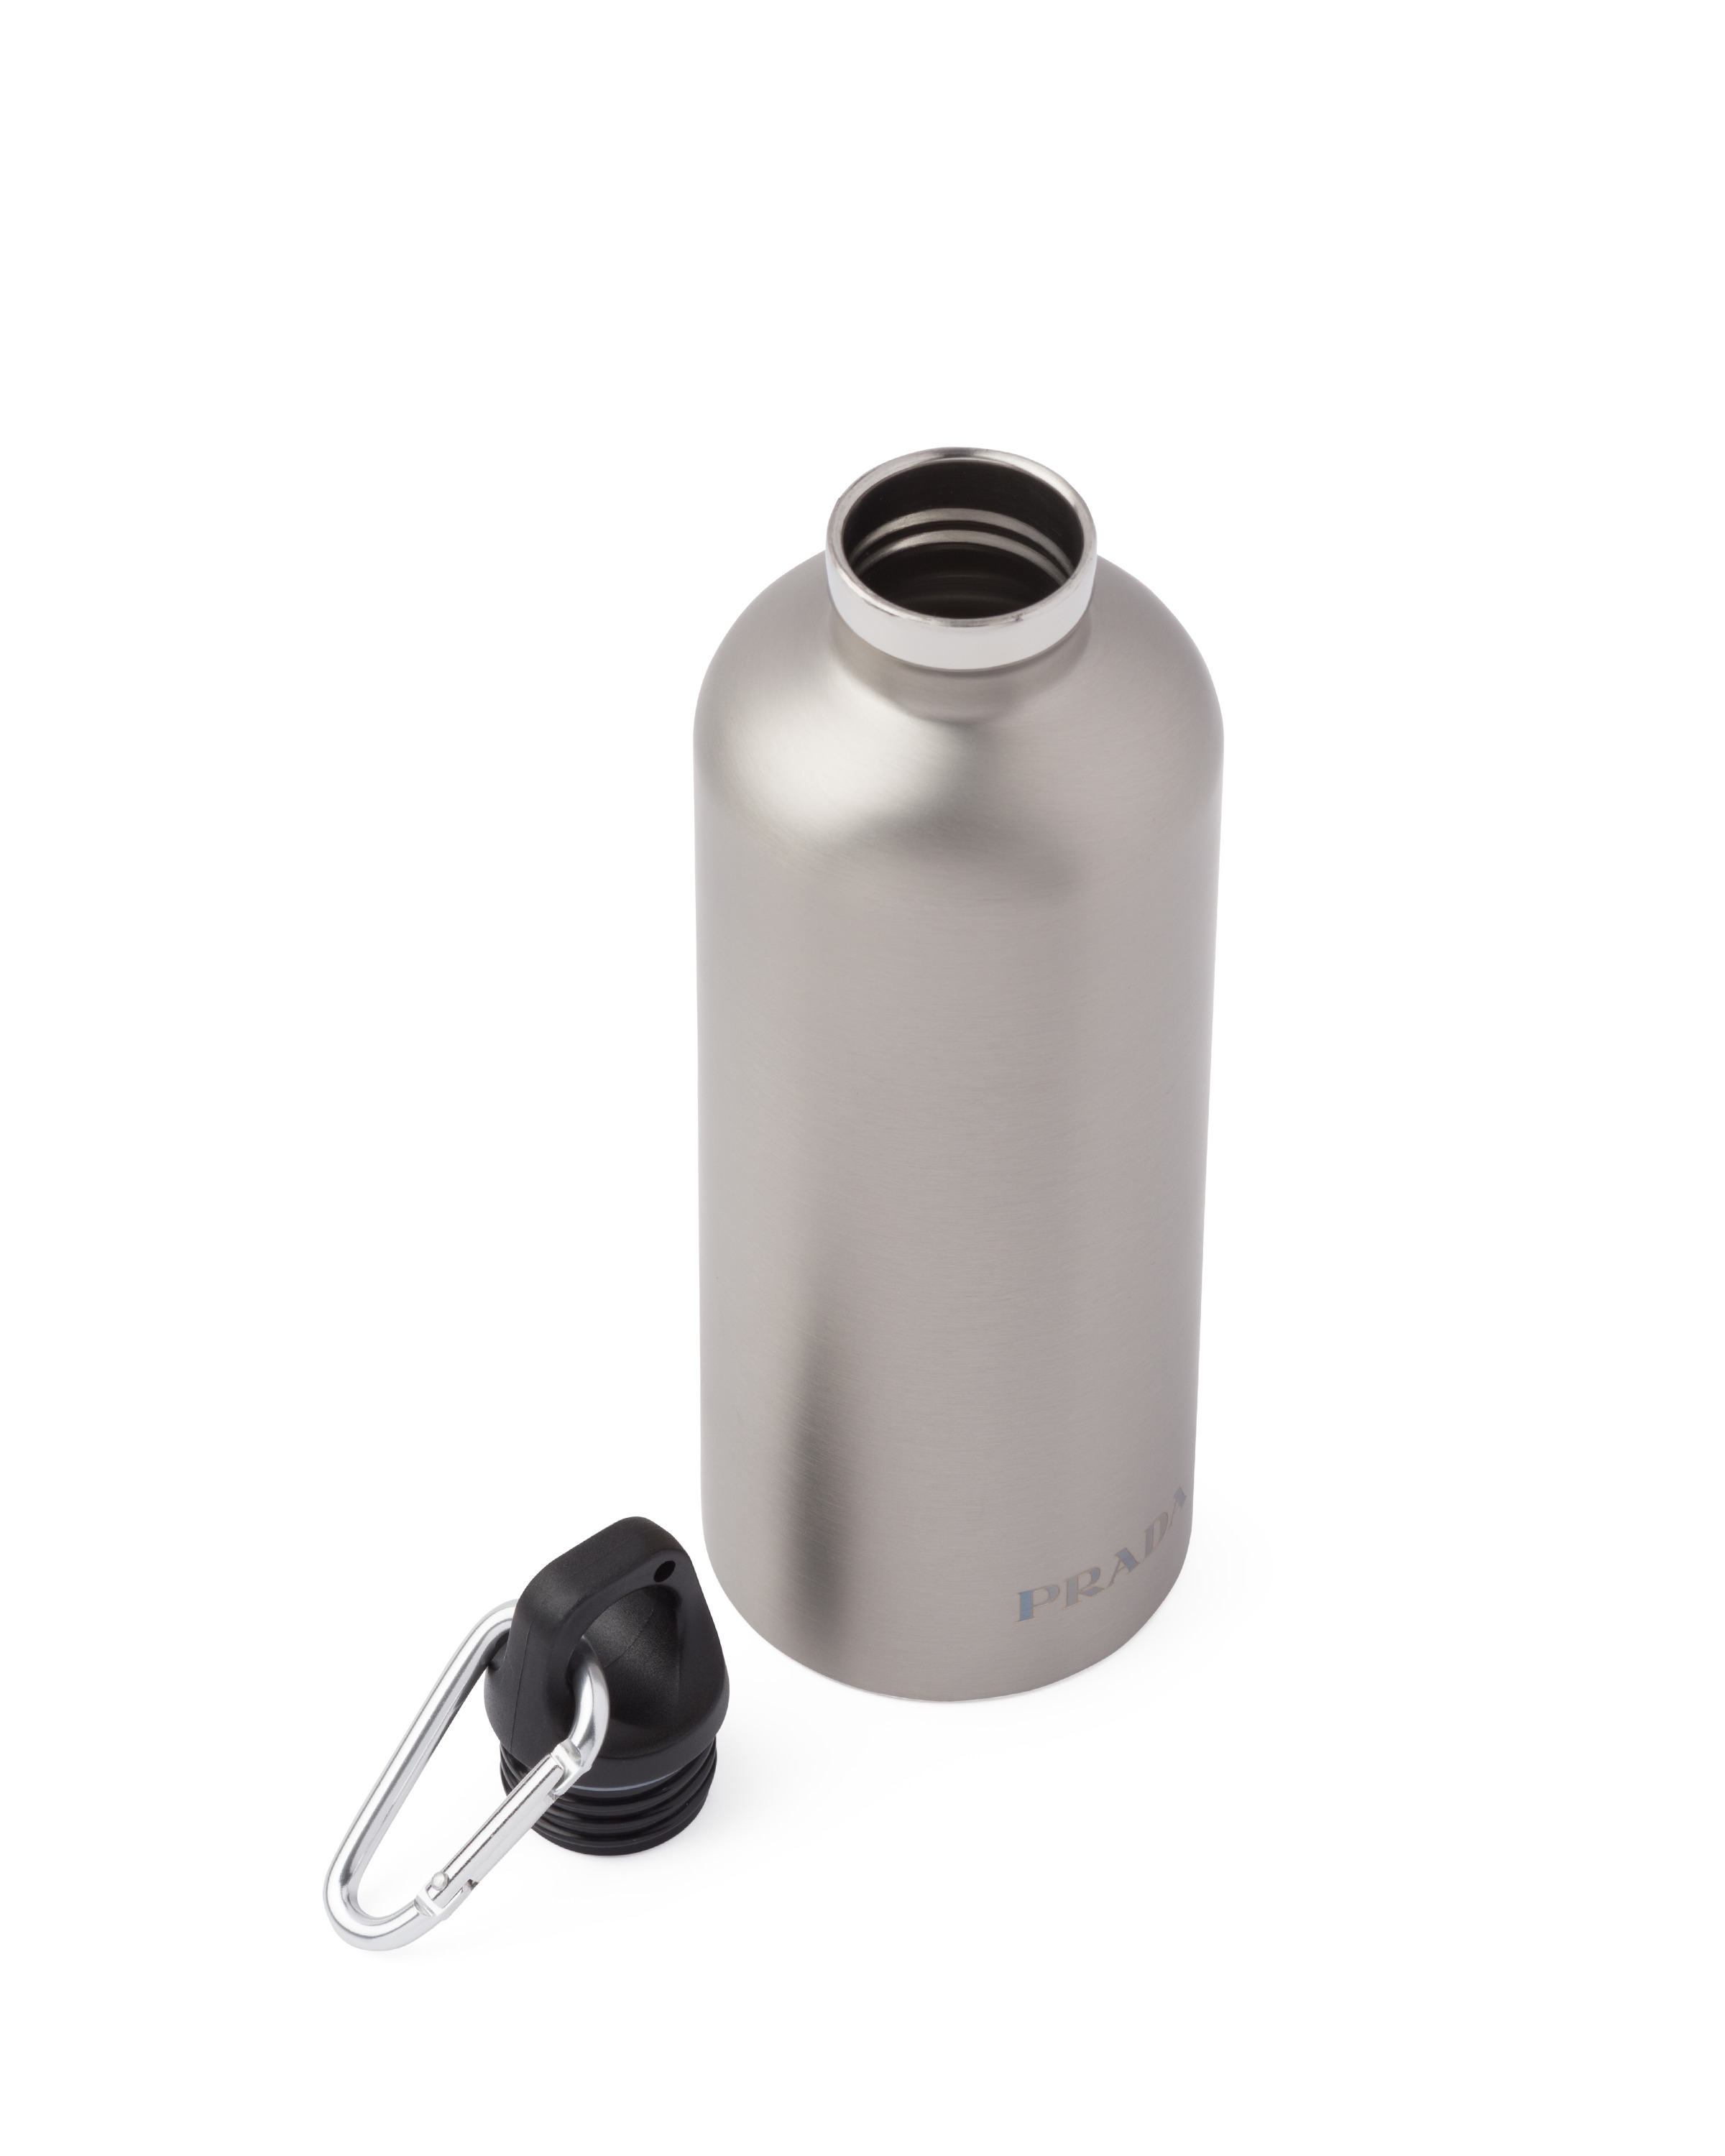 Stainless steel insulated water bottle, 500 ml - 3